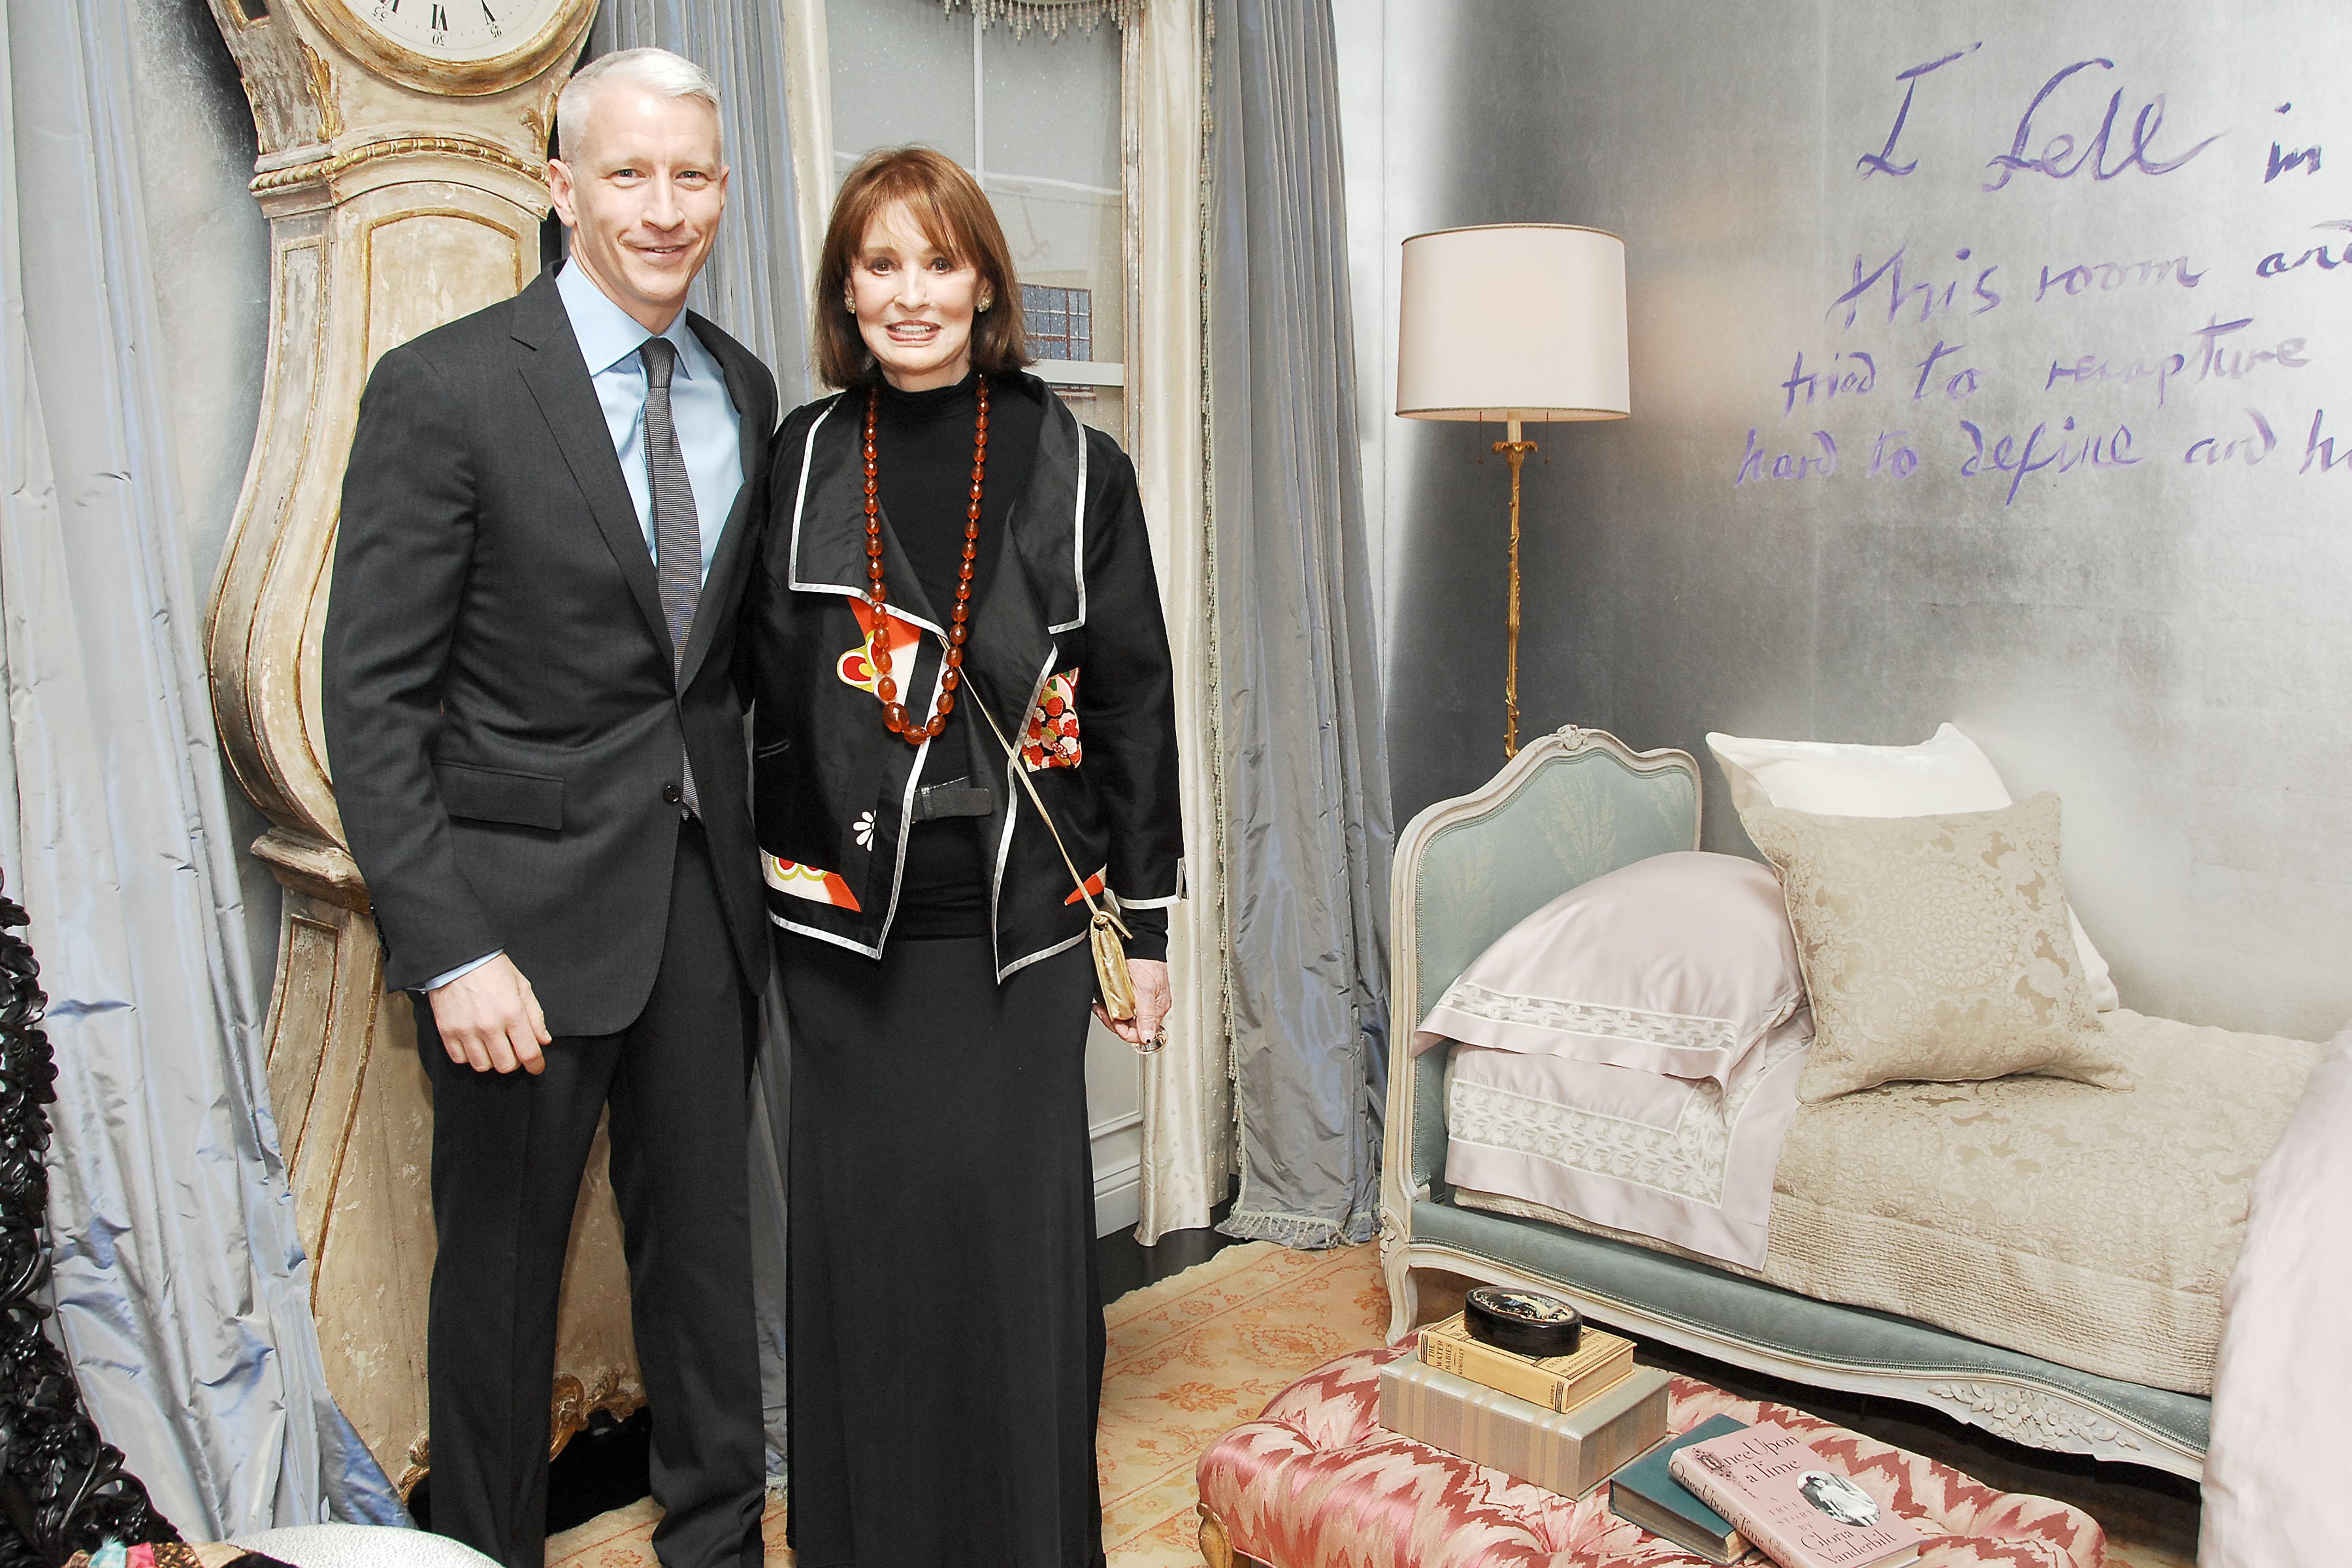 Anderson Cooper and Gloria Vanderbilt attend KIPS BAY BOYS & GIRLS CLUB 2009 Preview Gala & Cocktails at ASPREY at Kips Bay Decorator Show House & Asprey on April 16, 2009 in New York City. | Source: Getty Images